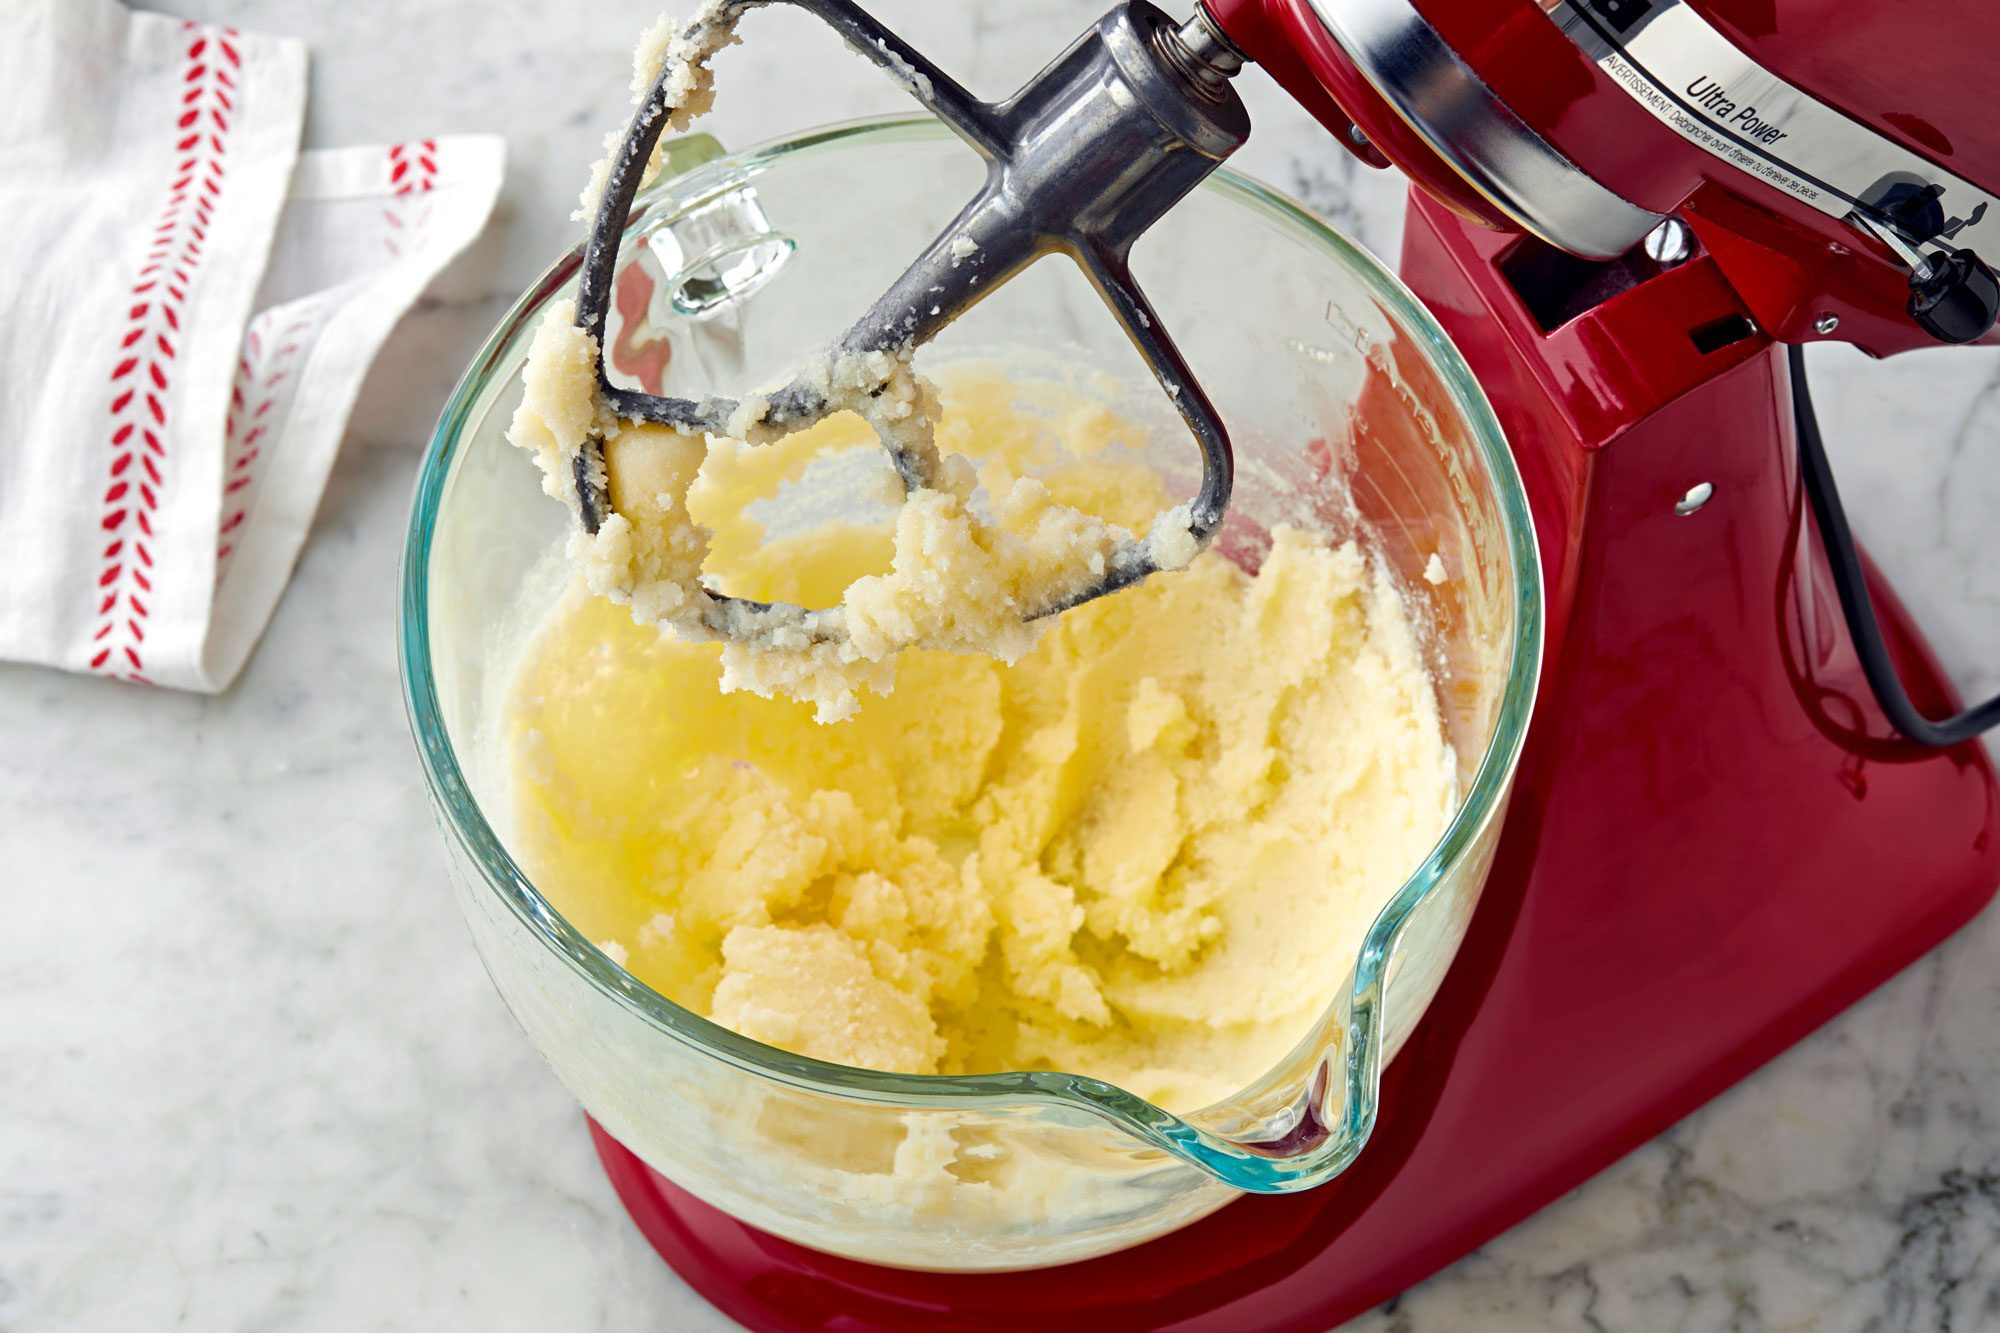 In a large bowl, mix cream butter and sugar until light.